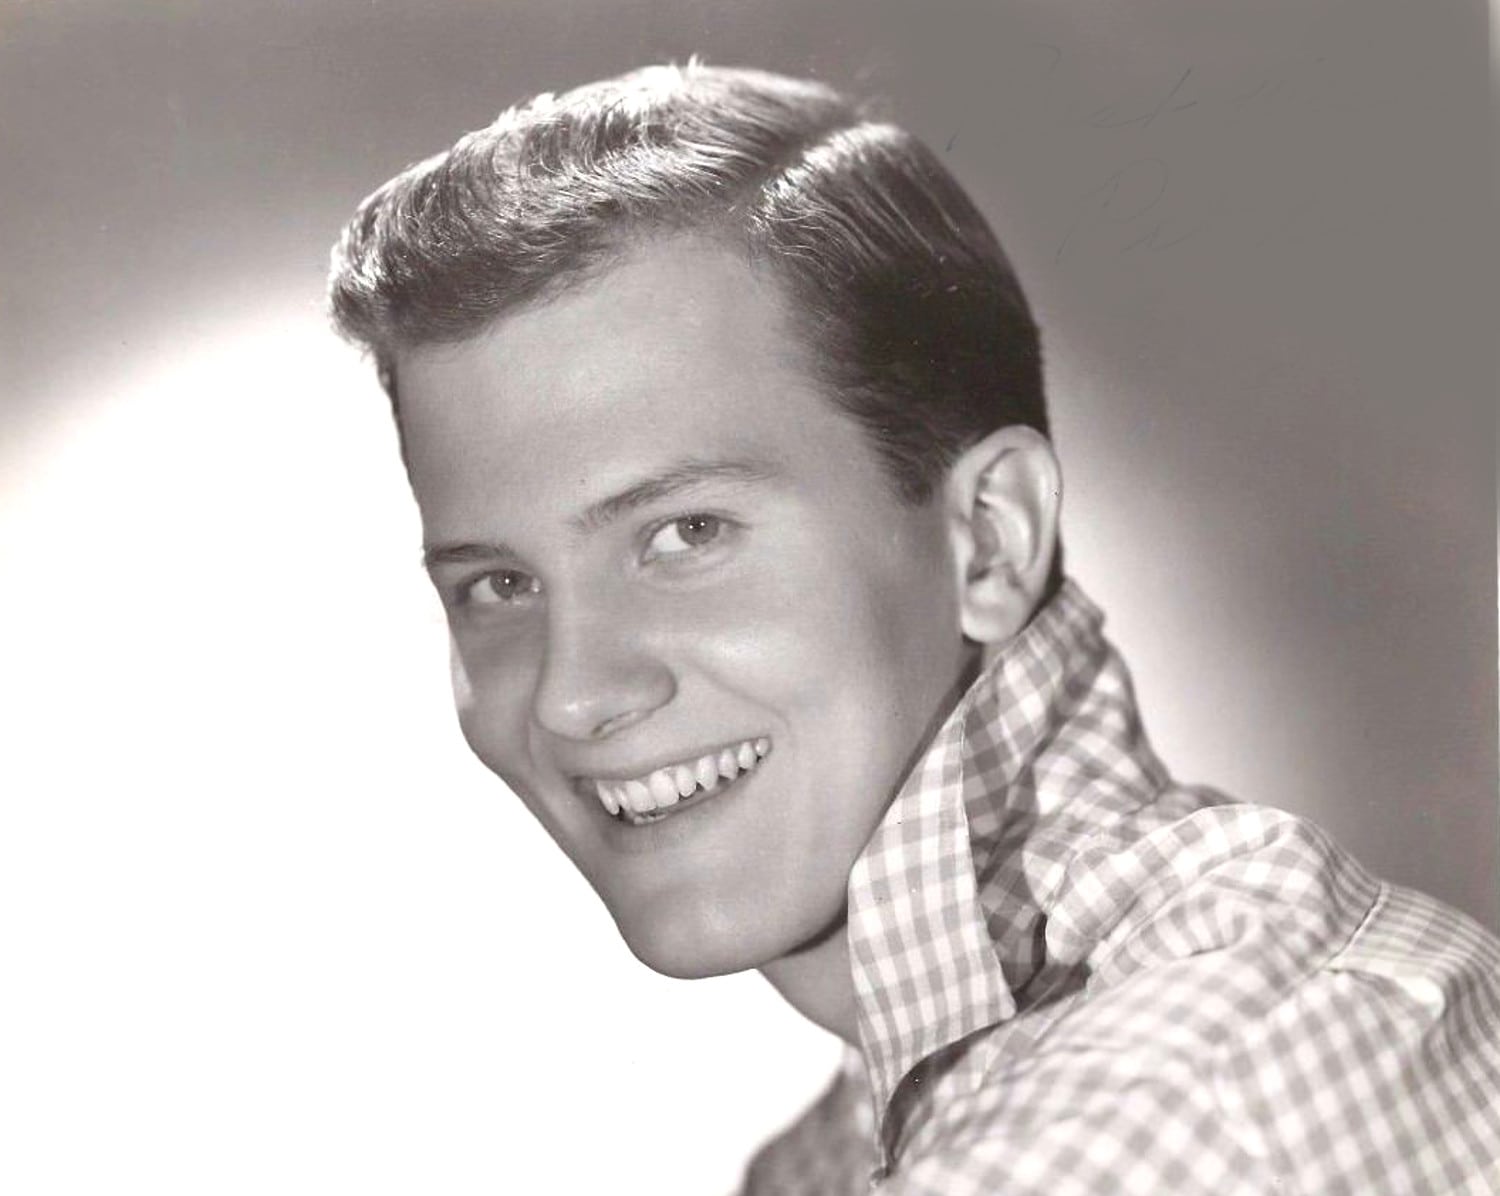 Should Pat Boone Be In The Rock & Roll Hall Of Fame?